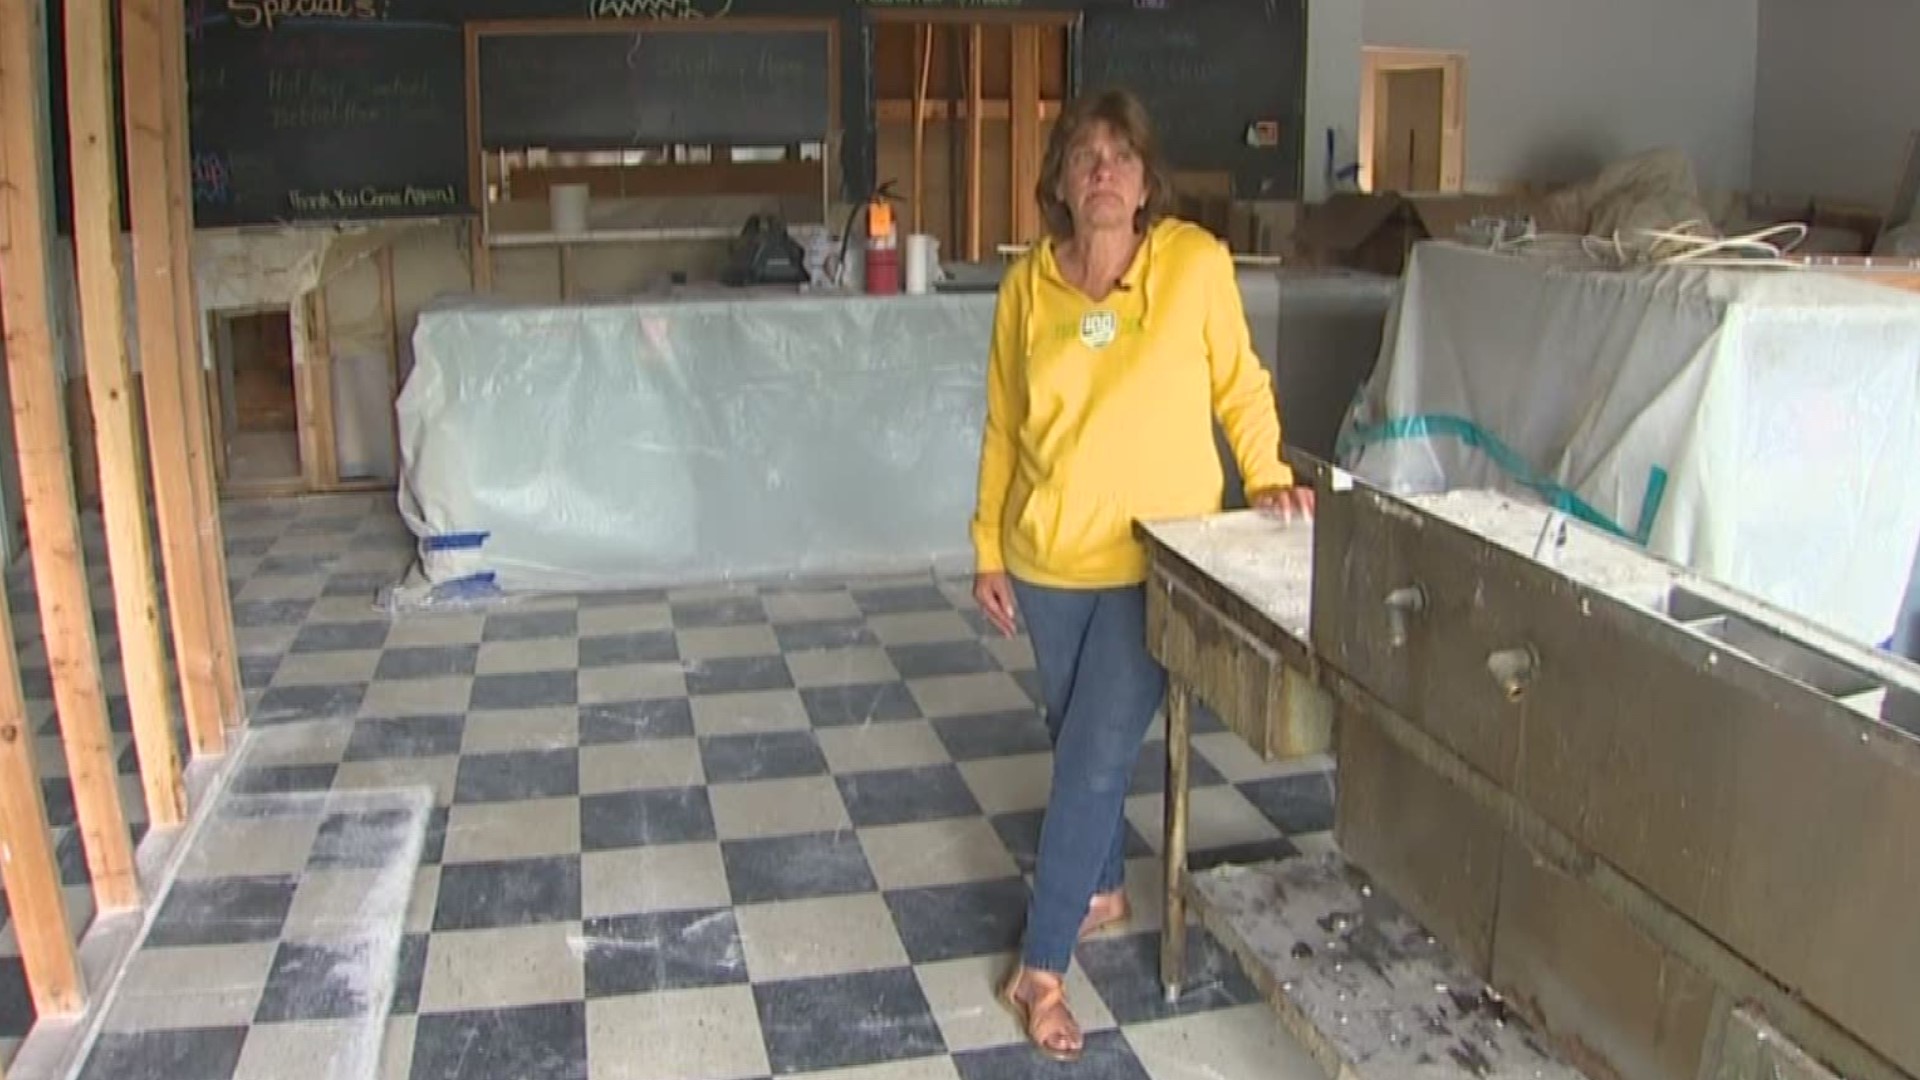 Six months ago, the community in Port Orchard was scrambling to help one another after a tornado touched down. No one was seriously hurt, but the storm did substantial damage to 50 homes. KING 5's Natalie Swaby takes a closer look at how some businesses are working to rebound.